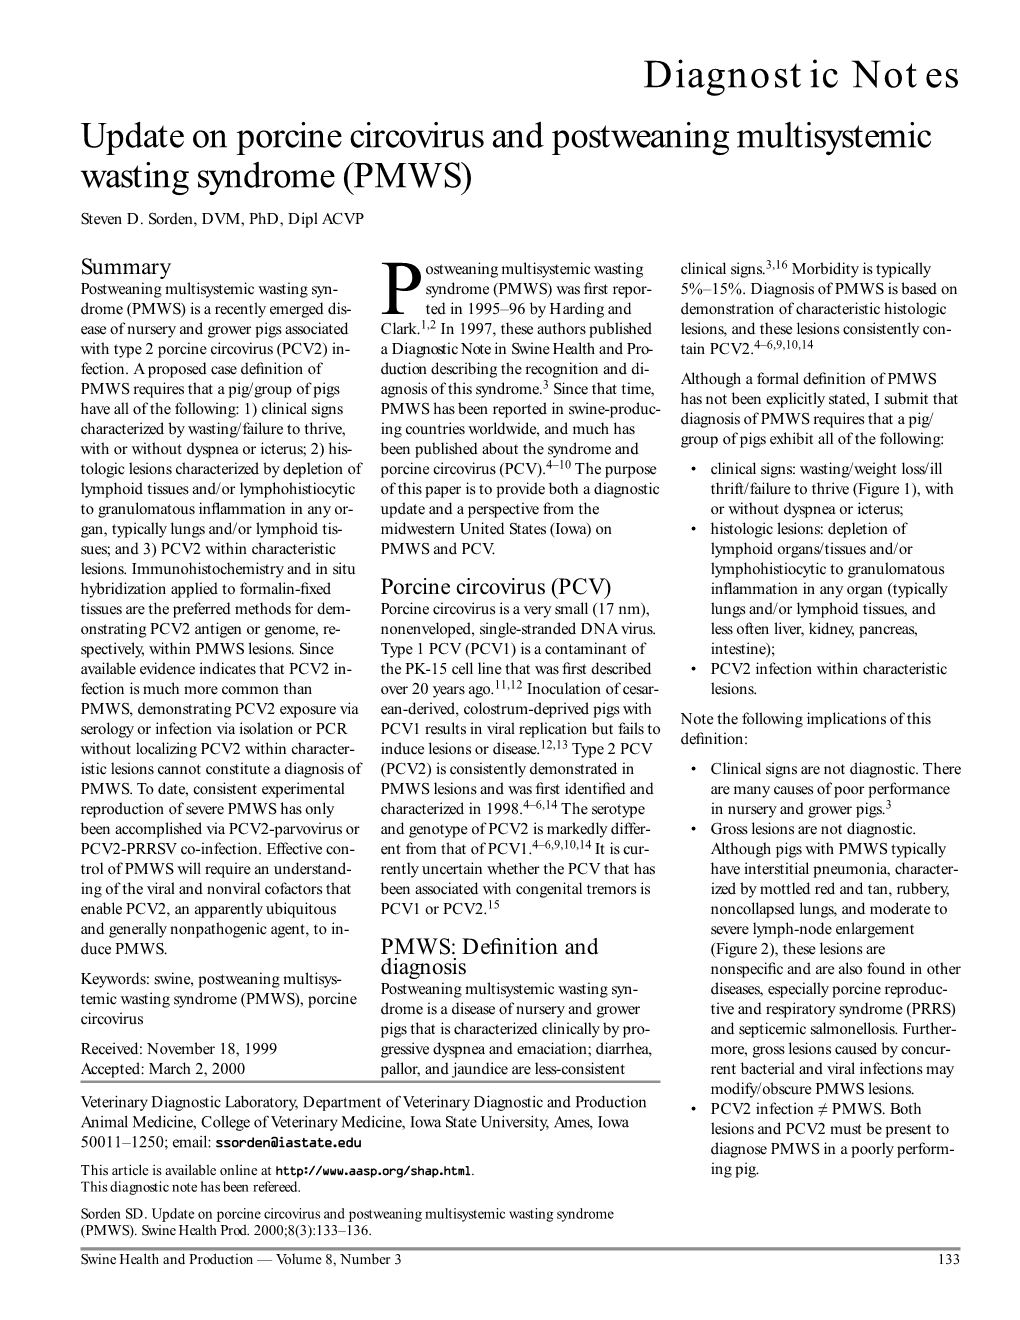 Update on Porcine Circovirus and Postweaning Multisystemic Wasting Syndrome (PMWS) Steven D